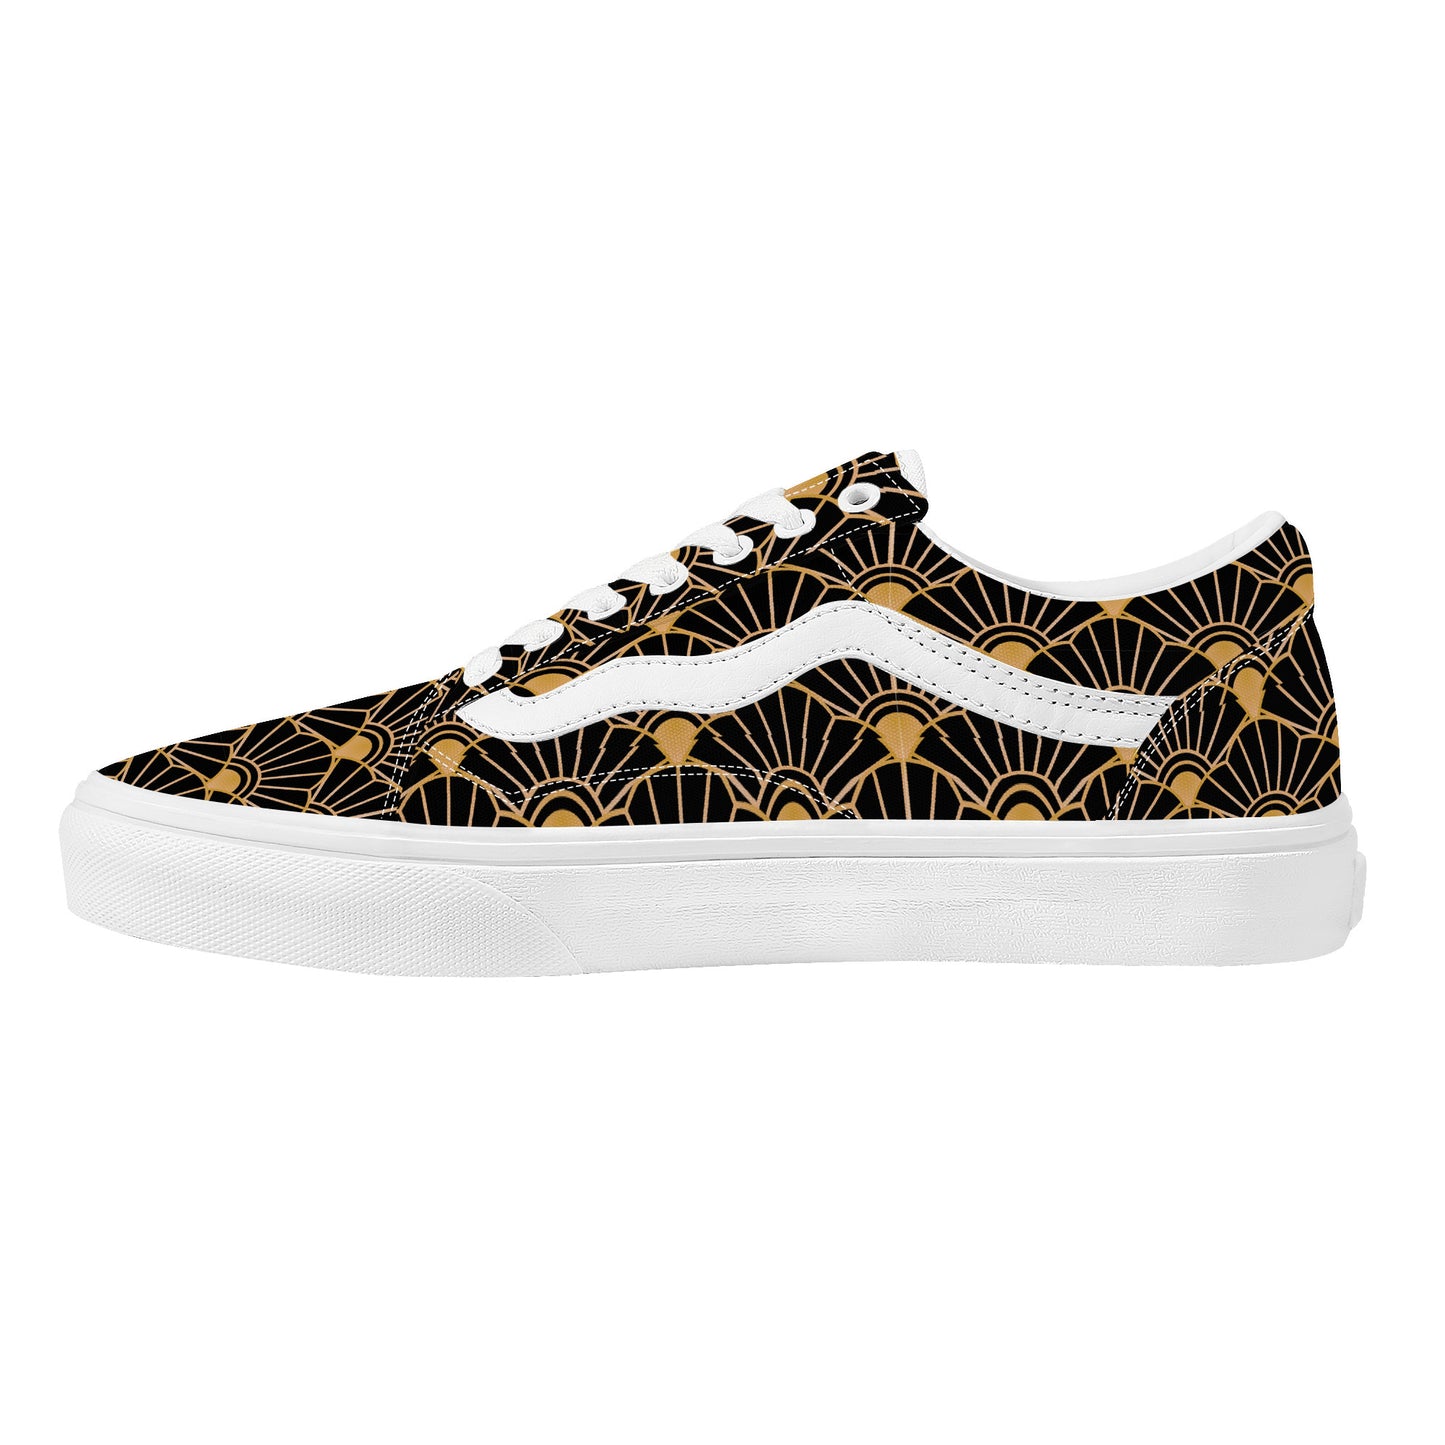 Black and Gold Low Top Flat Sneaker